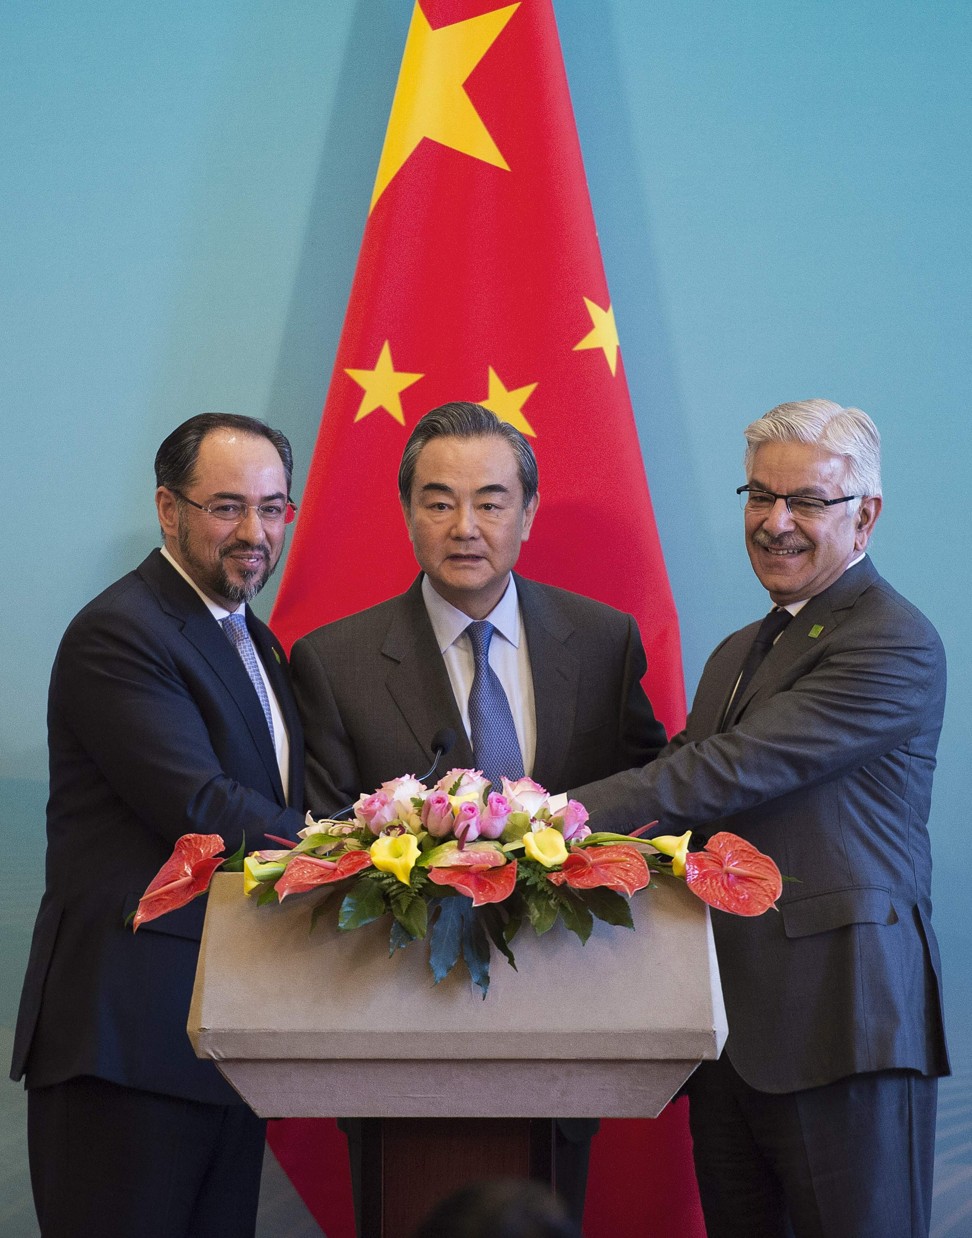 China's Foreign Minister Wang Yi (centre), Afghanistan's Foreign Minister Salahuddin Rabbani (left) and Pakistan's Foreign Minister Khawaja Muhammad Asif shake hands at the end of a joint press conference in Beijing. Photo: Agence France-Presse